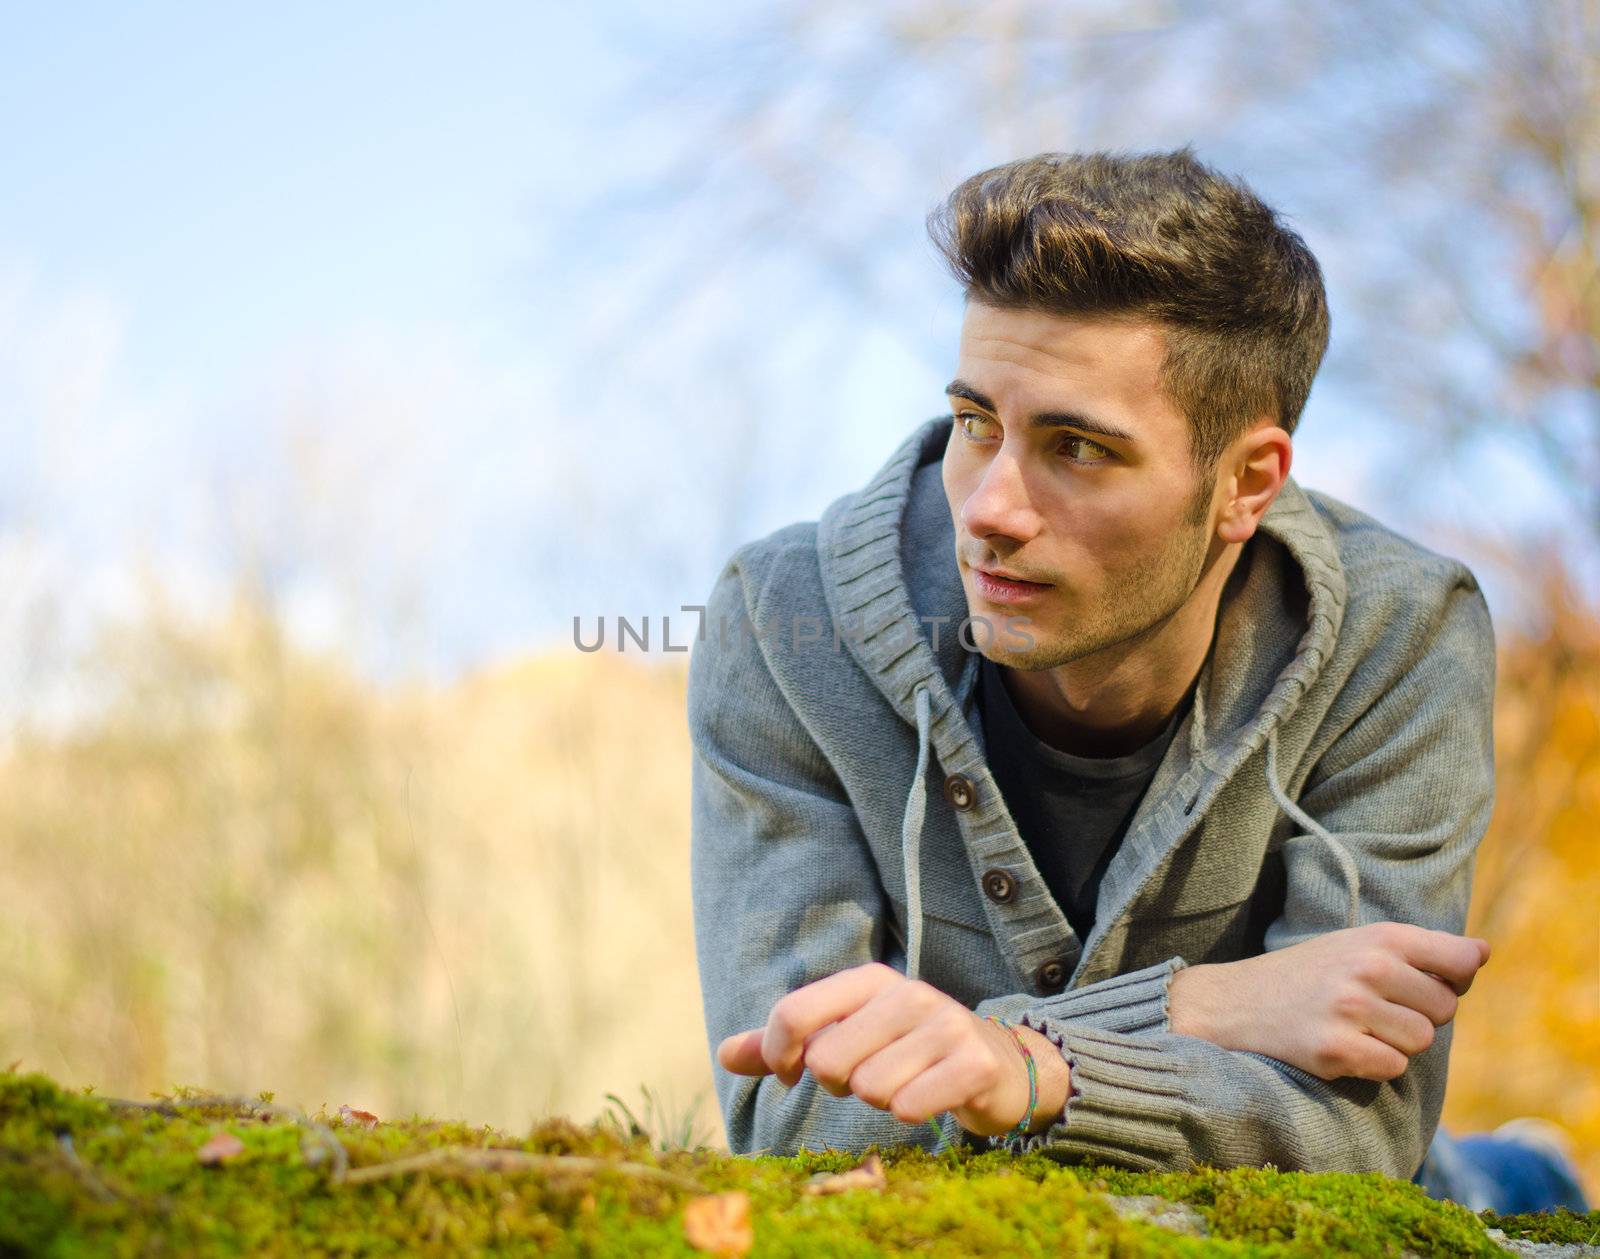 Attractive young man outdoors in nature lying on moss by artofphoto